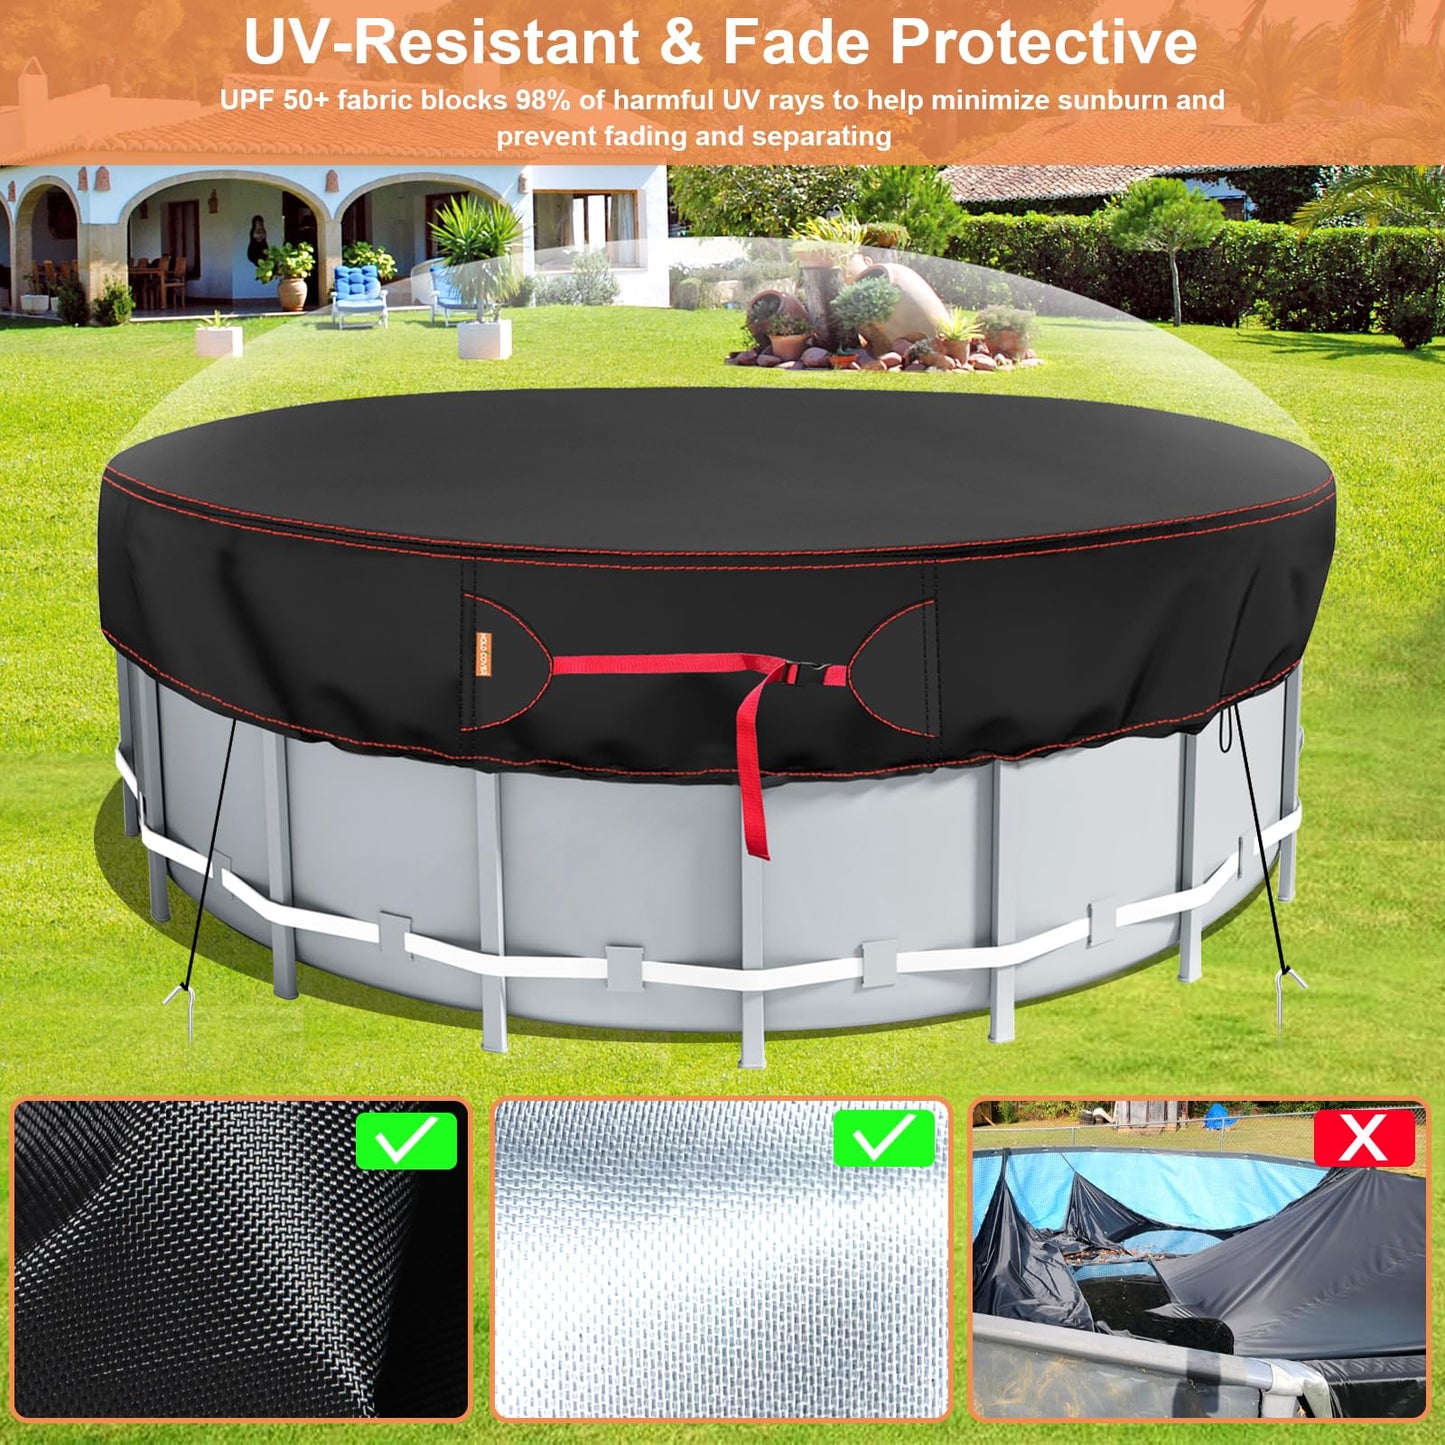 8 Ft Round Pool Cover, Solar Covers for Above Ground Pools, Stock Tank Pool Cover Protector with Pool Cover Accessories, Round Hot Tub Cover Ideal for Waterproof and Dustproof(8Ft)